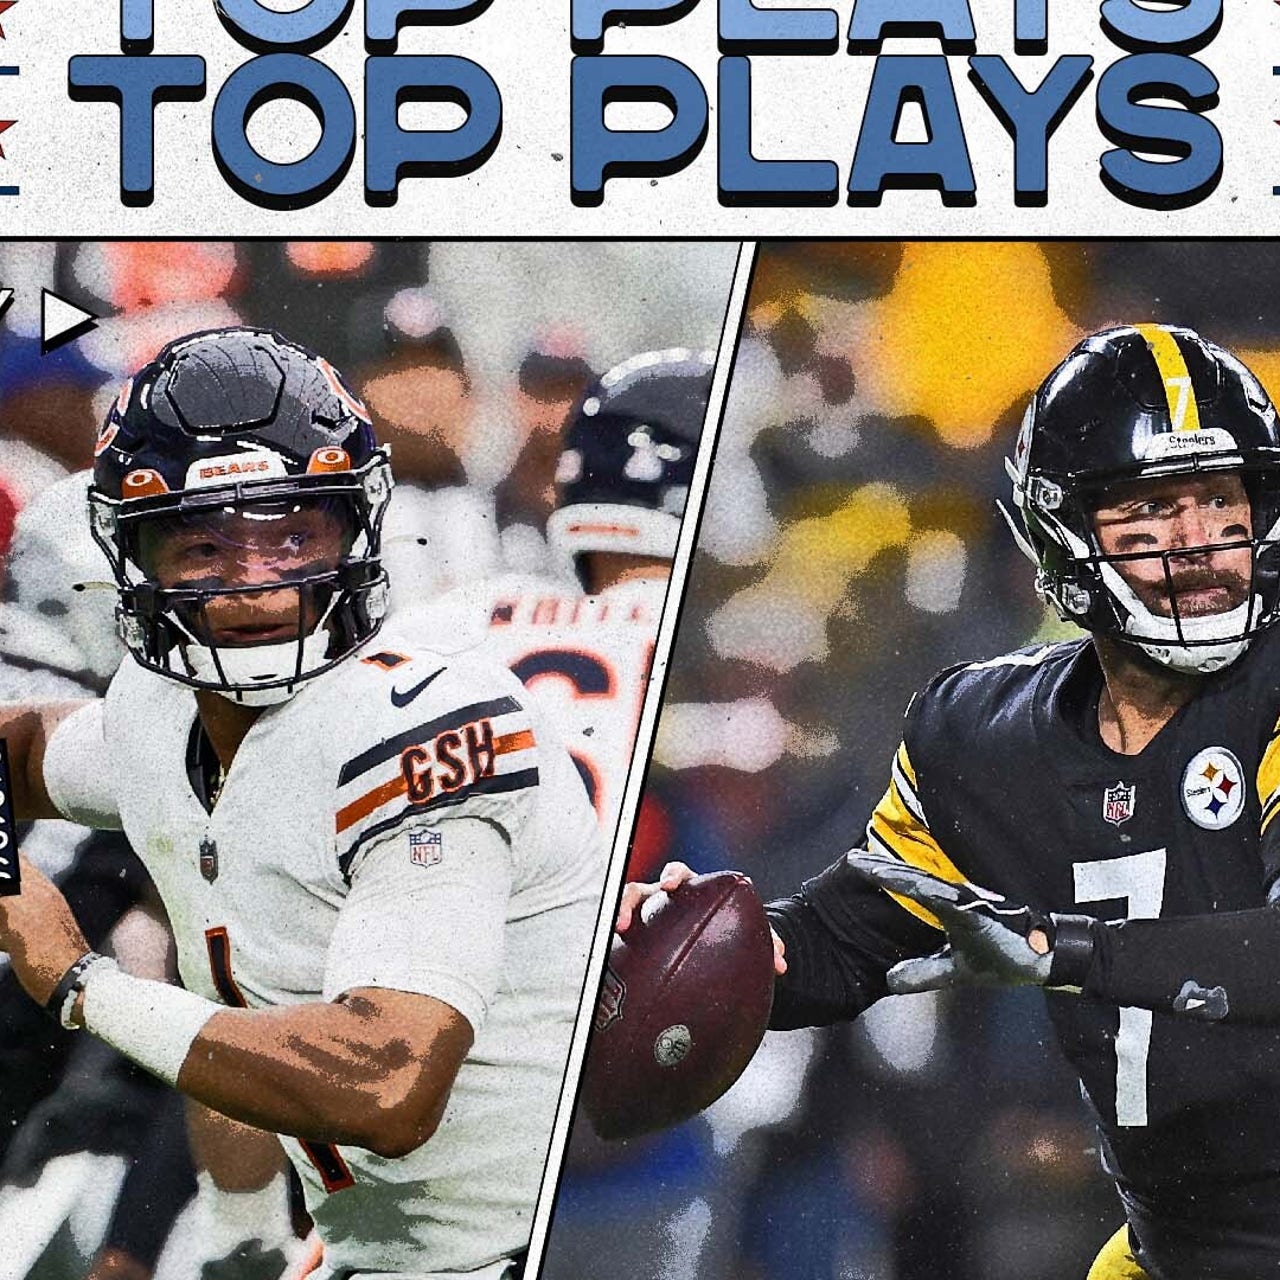 Monday Night Football top plays: Steelers narrowly escape Bears in